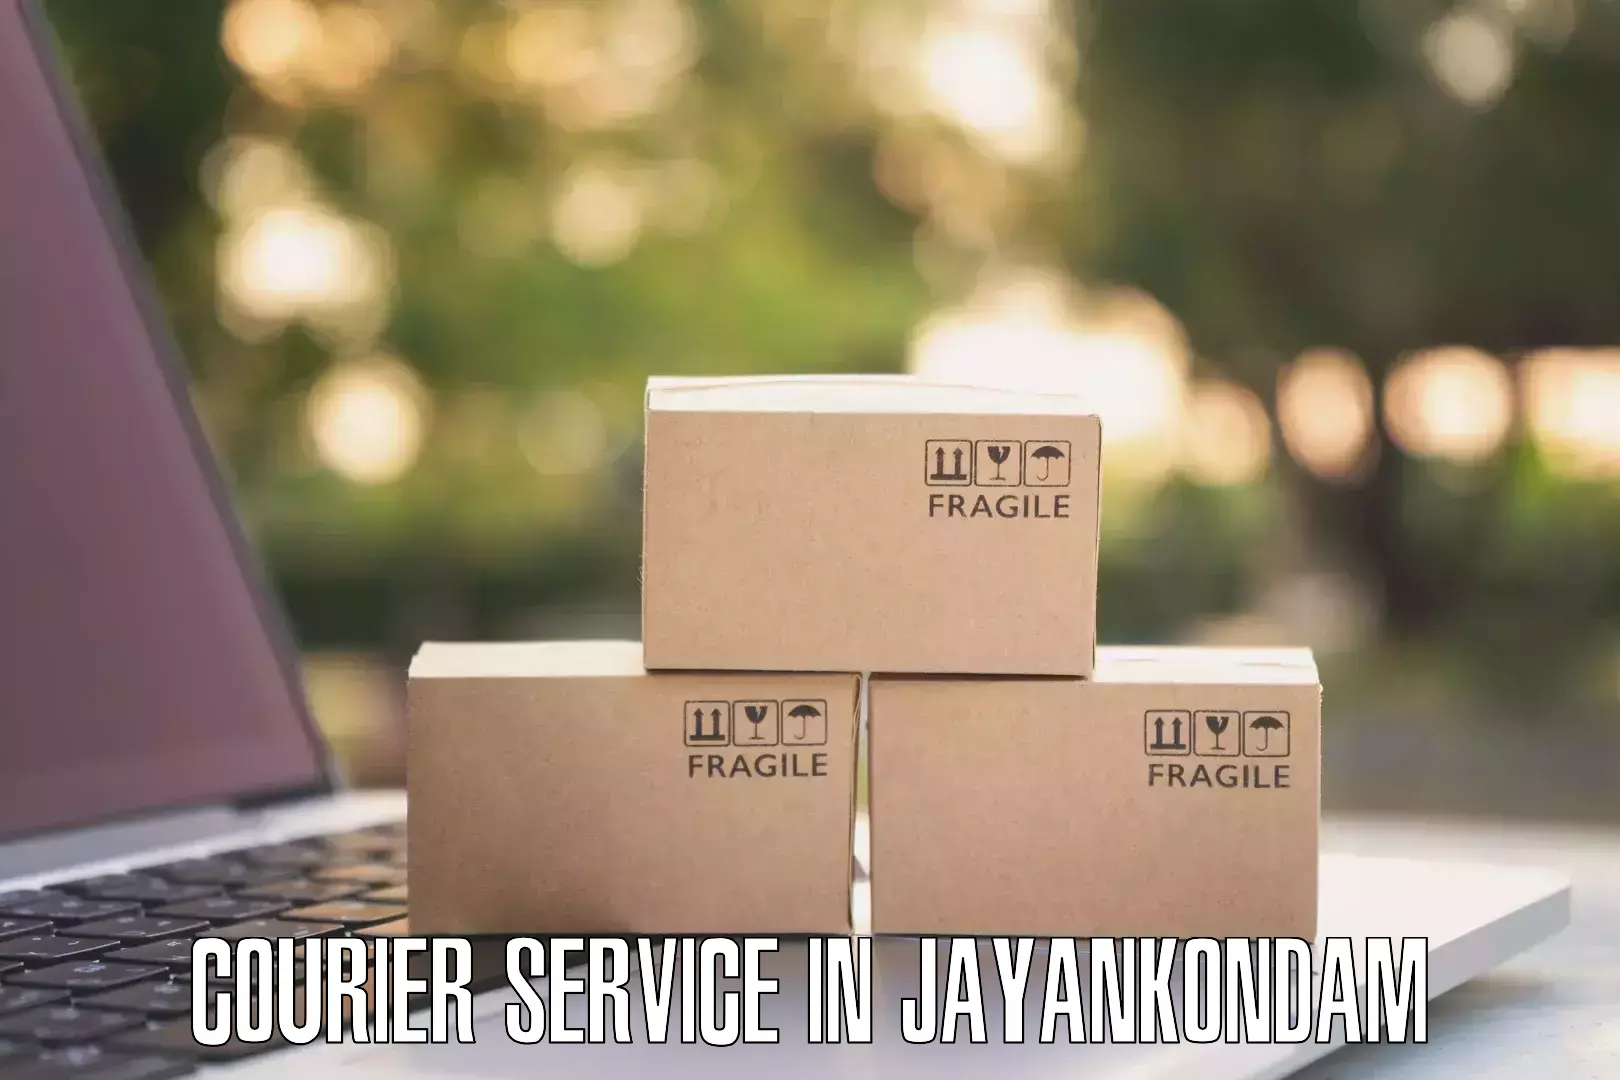 Subscription-based courier in Jayankondam